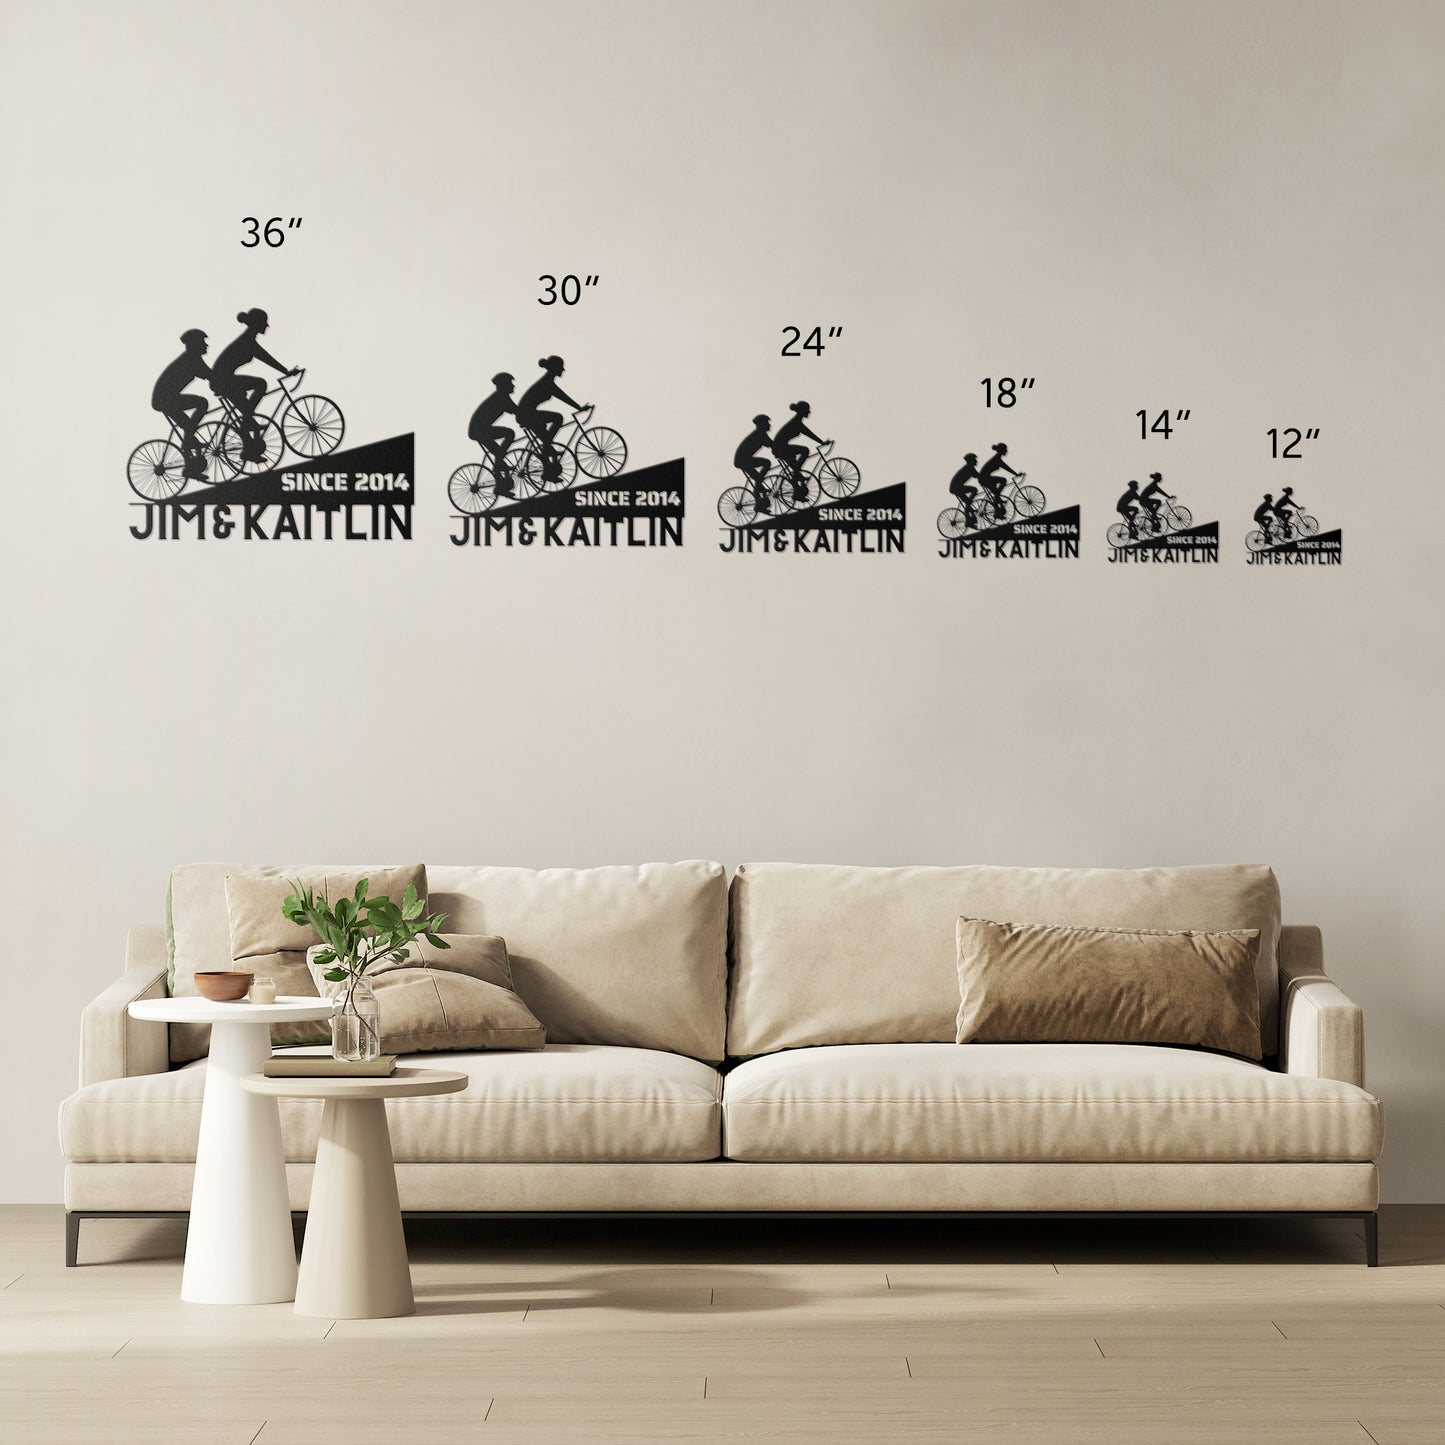 A Personalized Couple Cycling Uphill Metal Wall Art Sign, made from 18 gauge steel and powder coated for durability, manufactured by teelaunch.